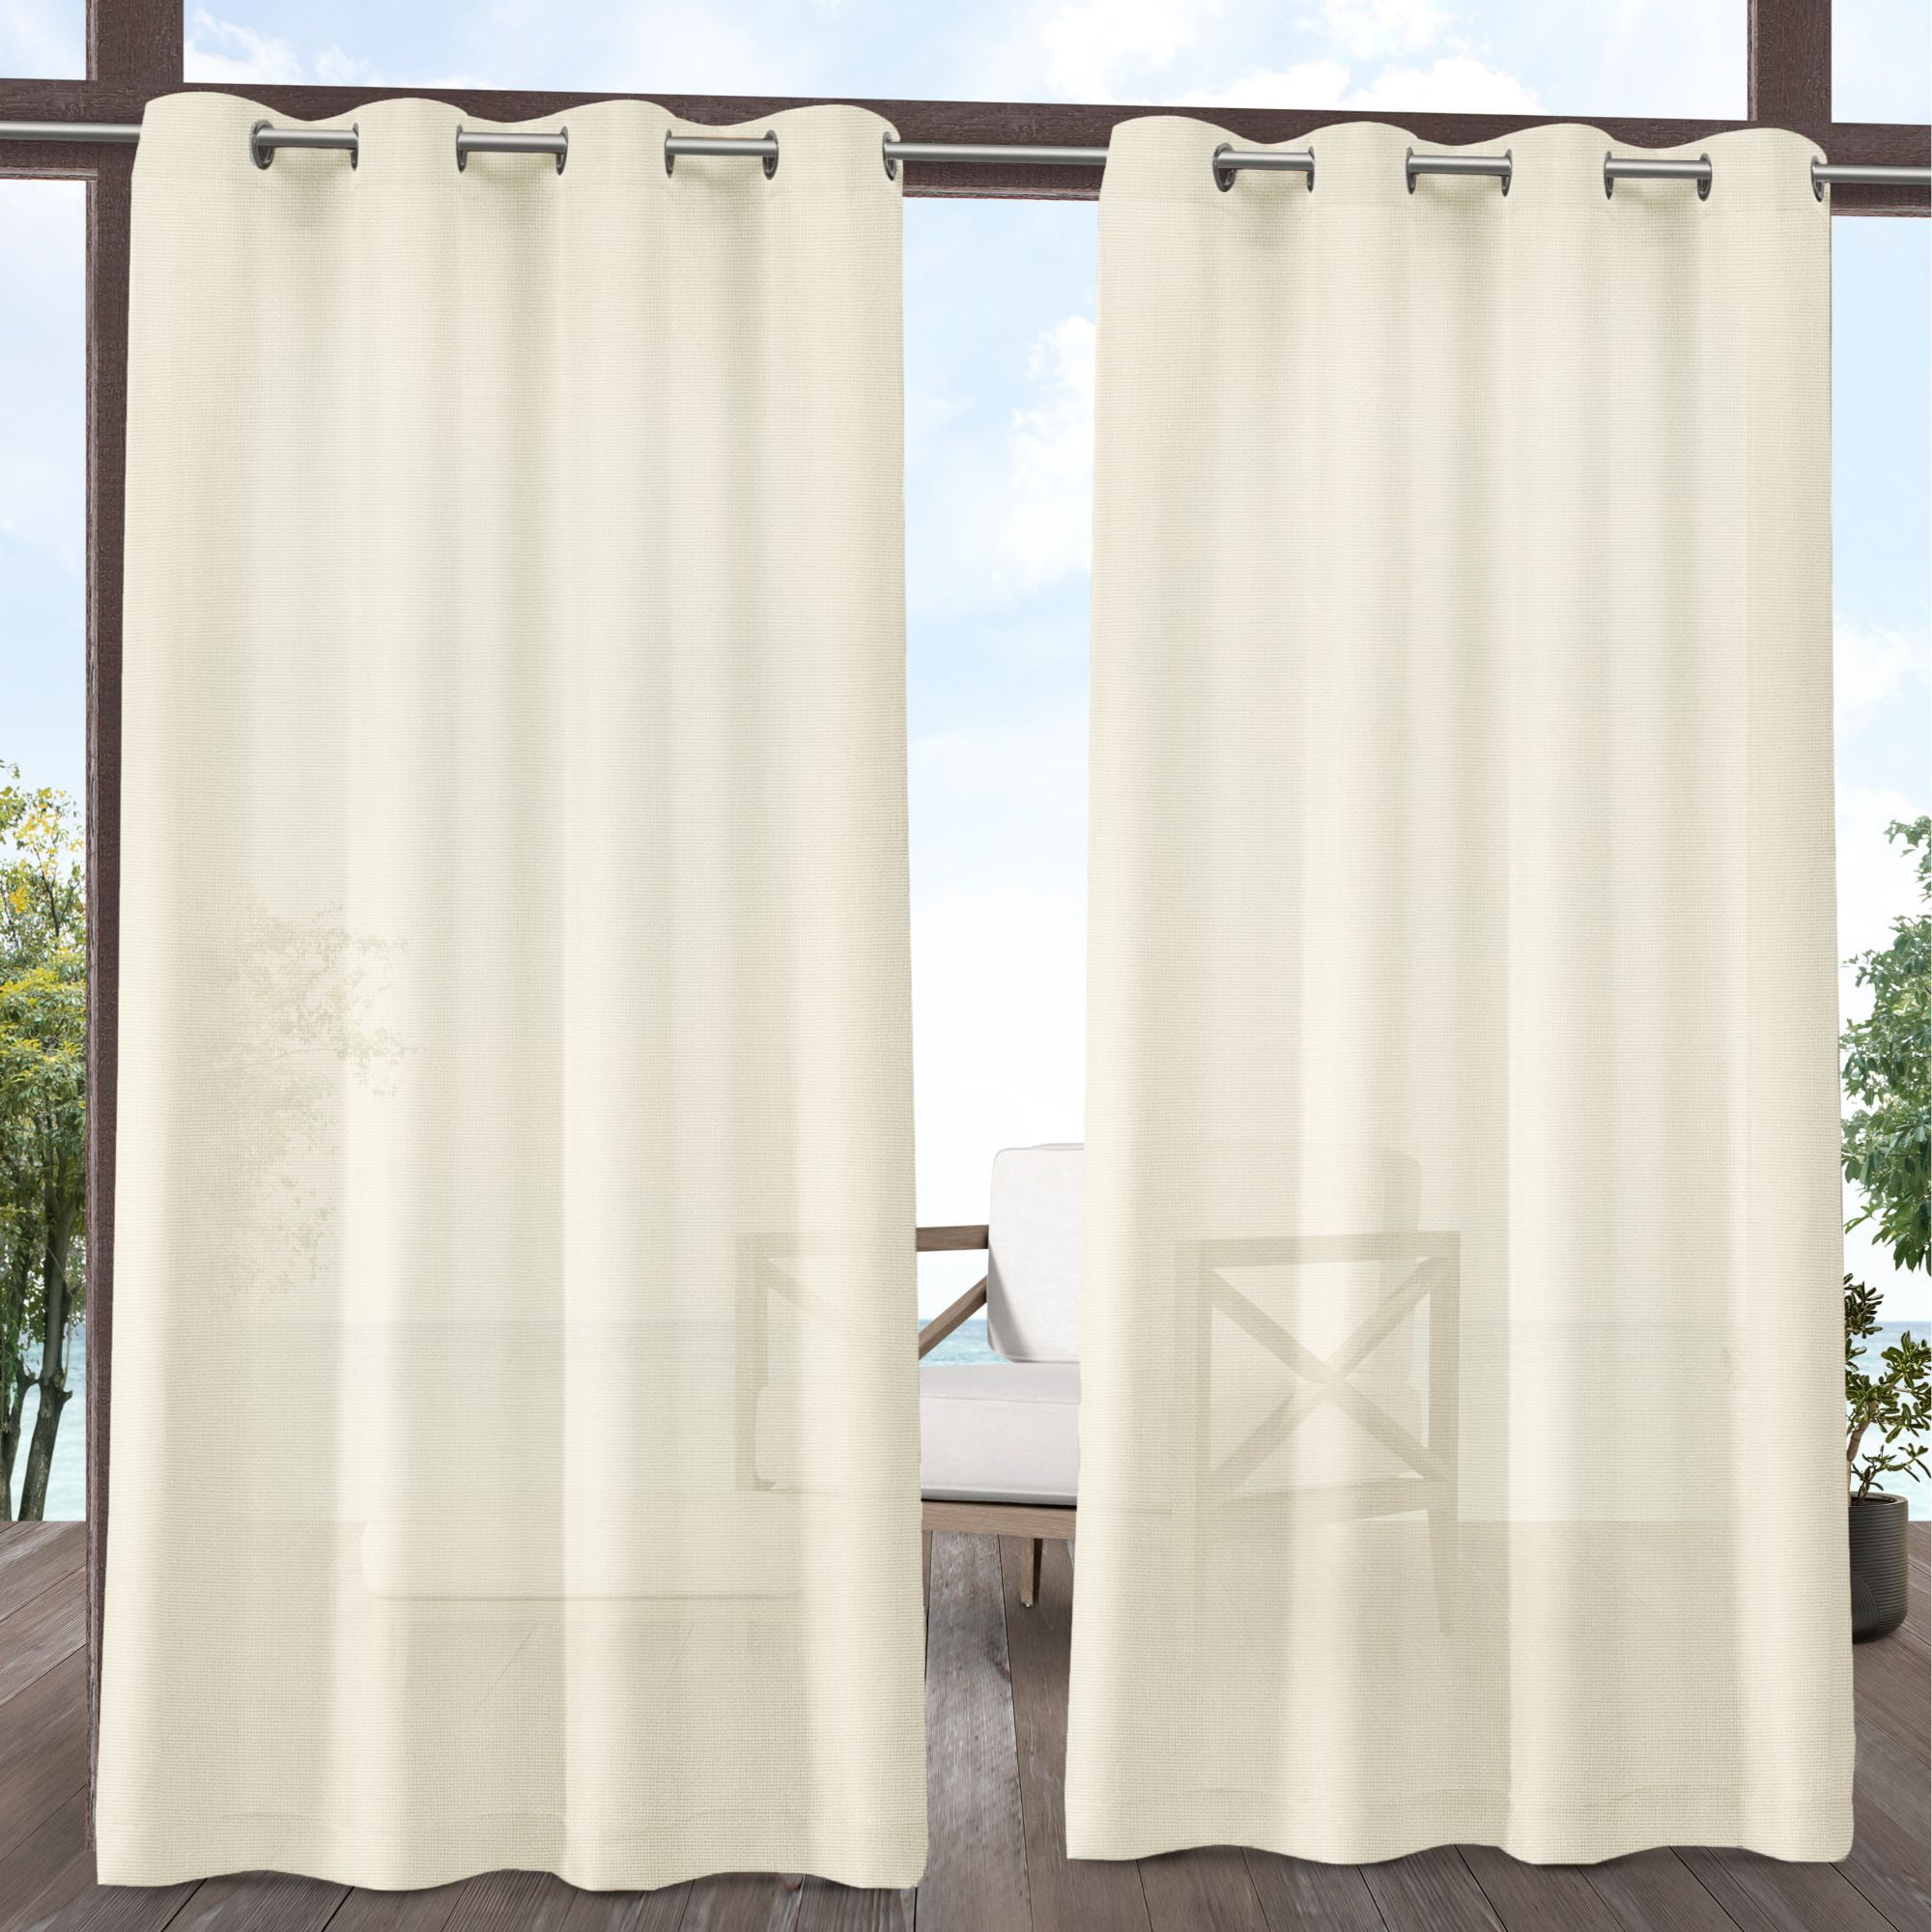 Exclusive Home Curtains EH8171-01 2-108G Delano Heavyweight Textured Indoor/Outdoor Grommet Top Curtain Panel Pair 2 Piece Winter White 54x108 